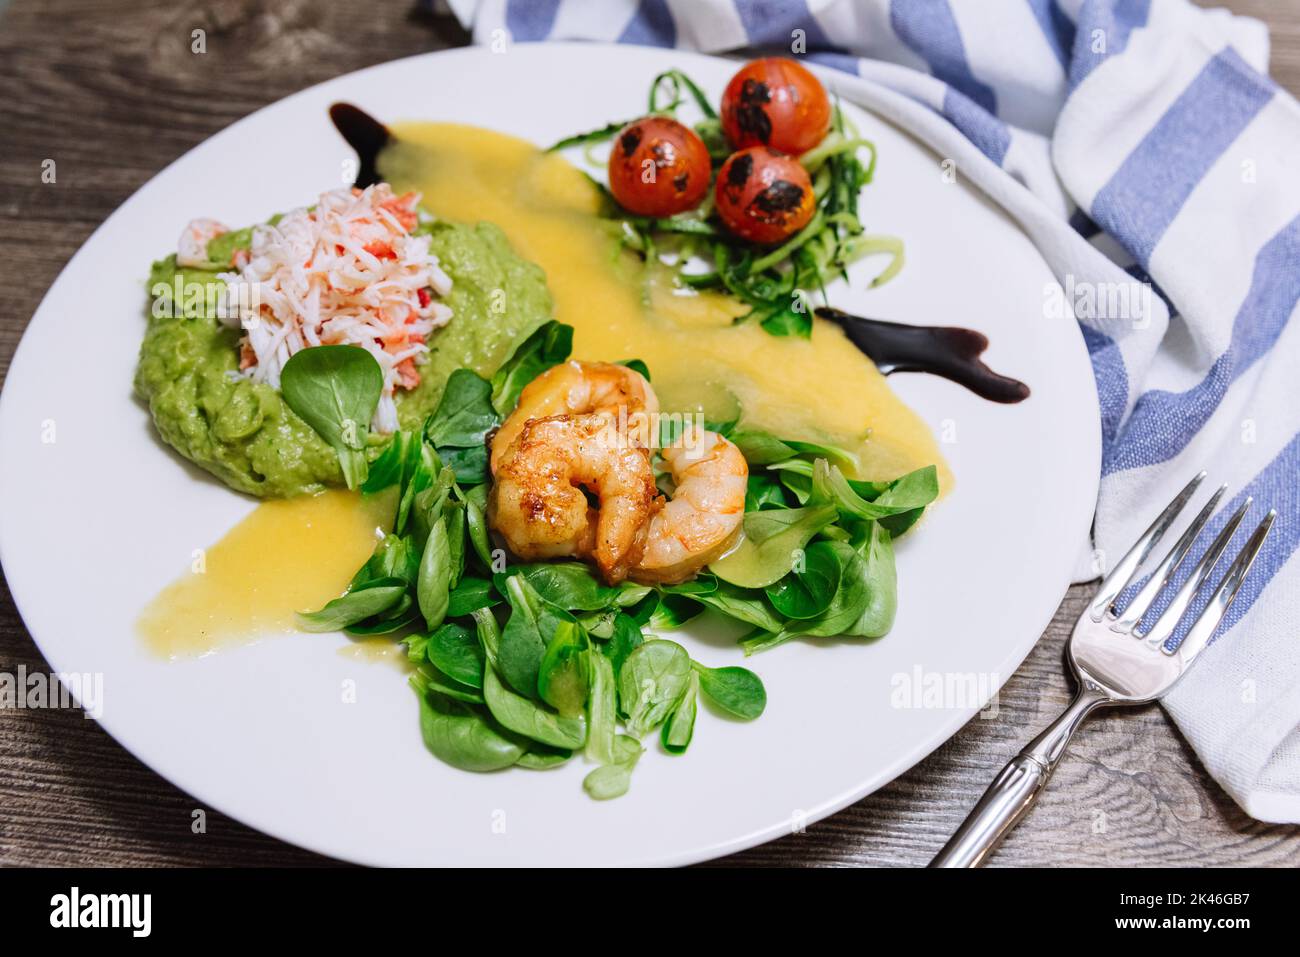 Salad with crab, cucumber, cocktail shrimp, avocado tartar and mango sauce. View from slightly above. Fresh and juicy foods. Homemade mouthwatering fo Stock Photo